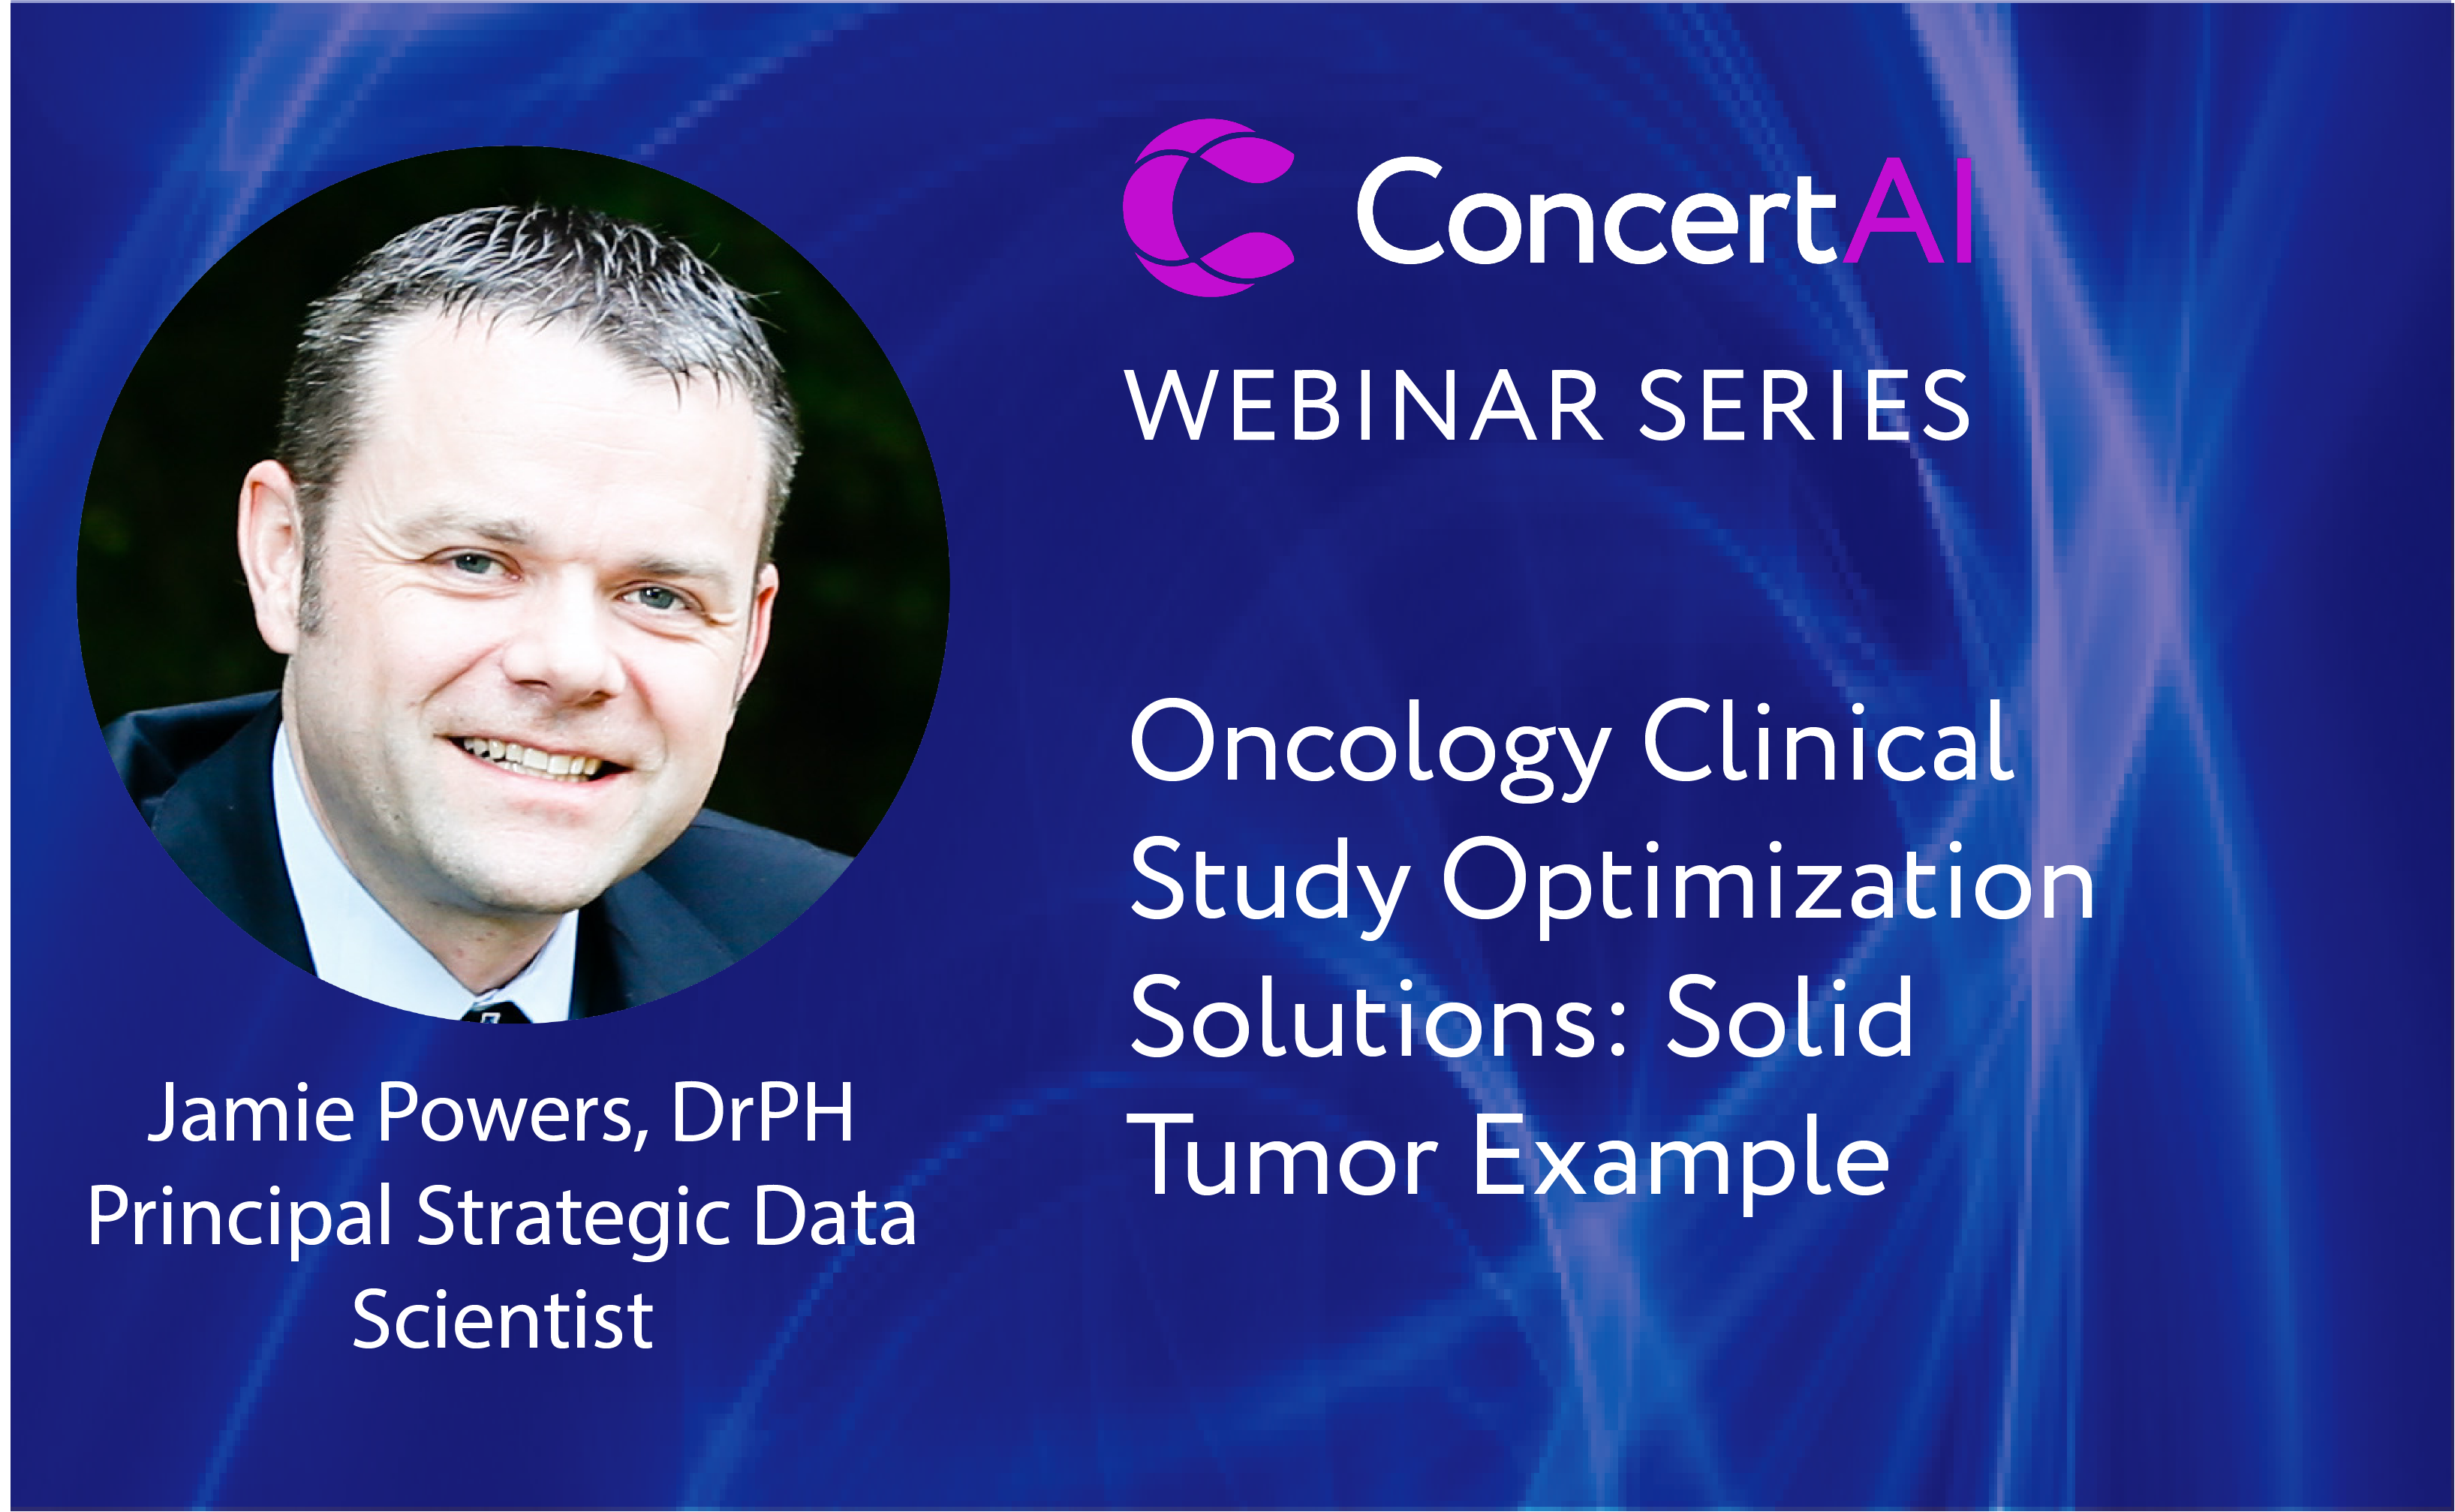 Oncology Clinical Study Optimization Solutions: Solid Tumor Example